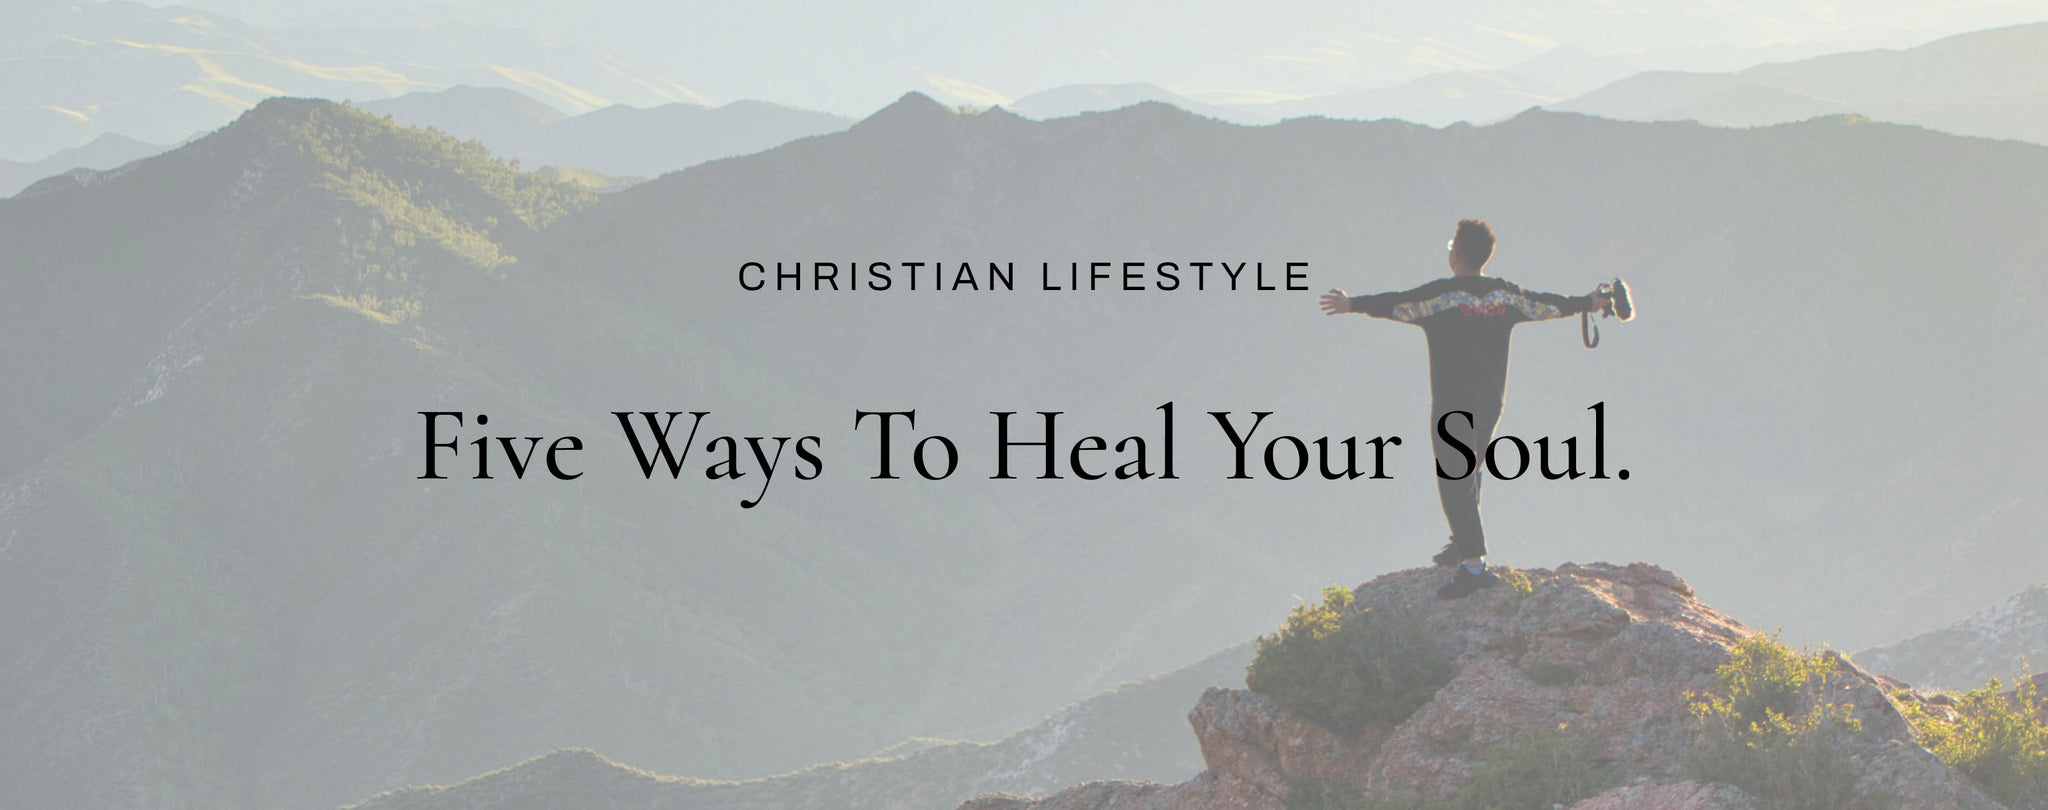 5 ways to heal your soul